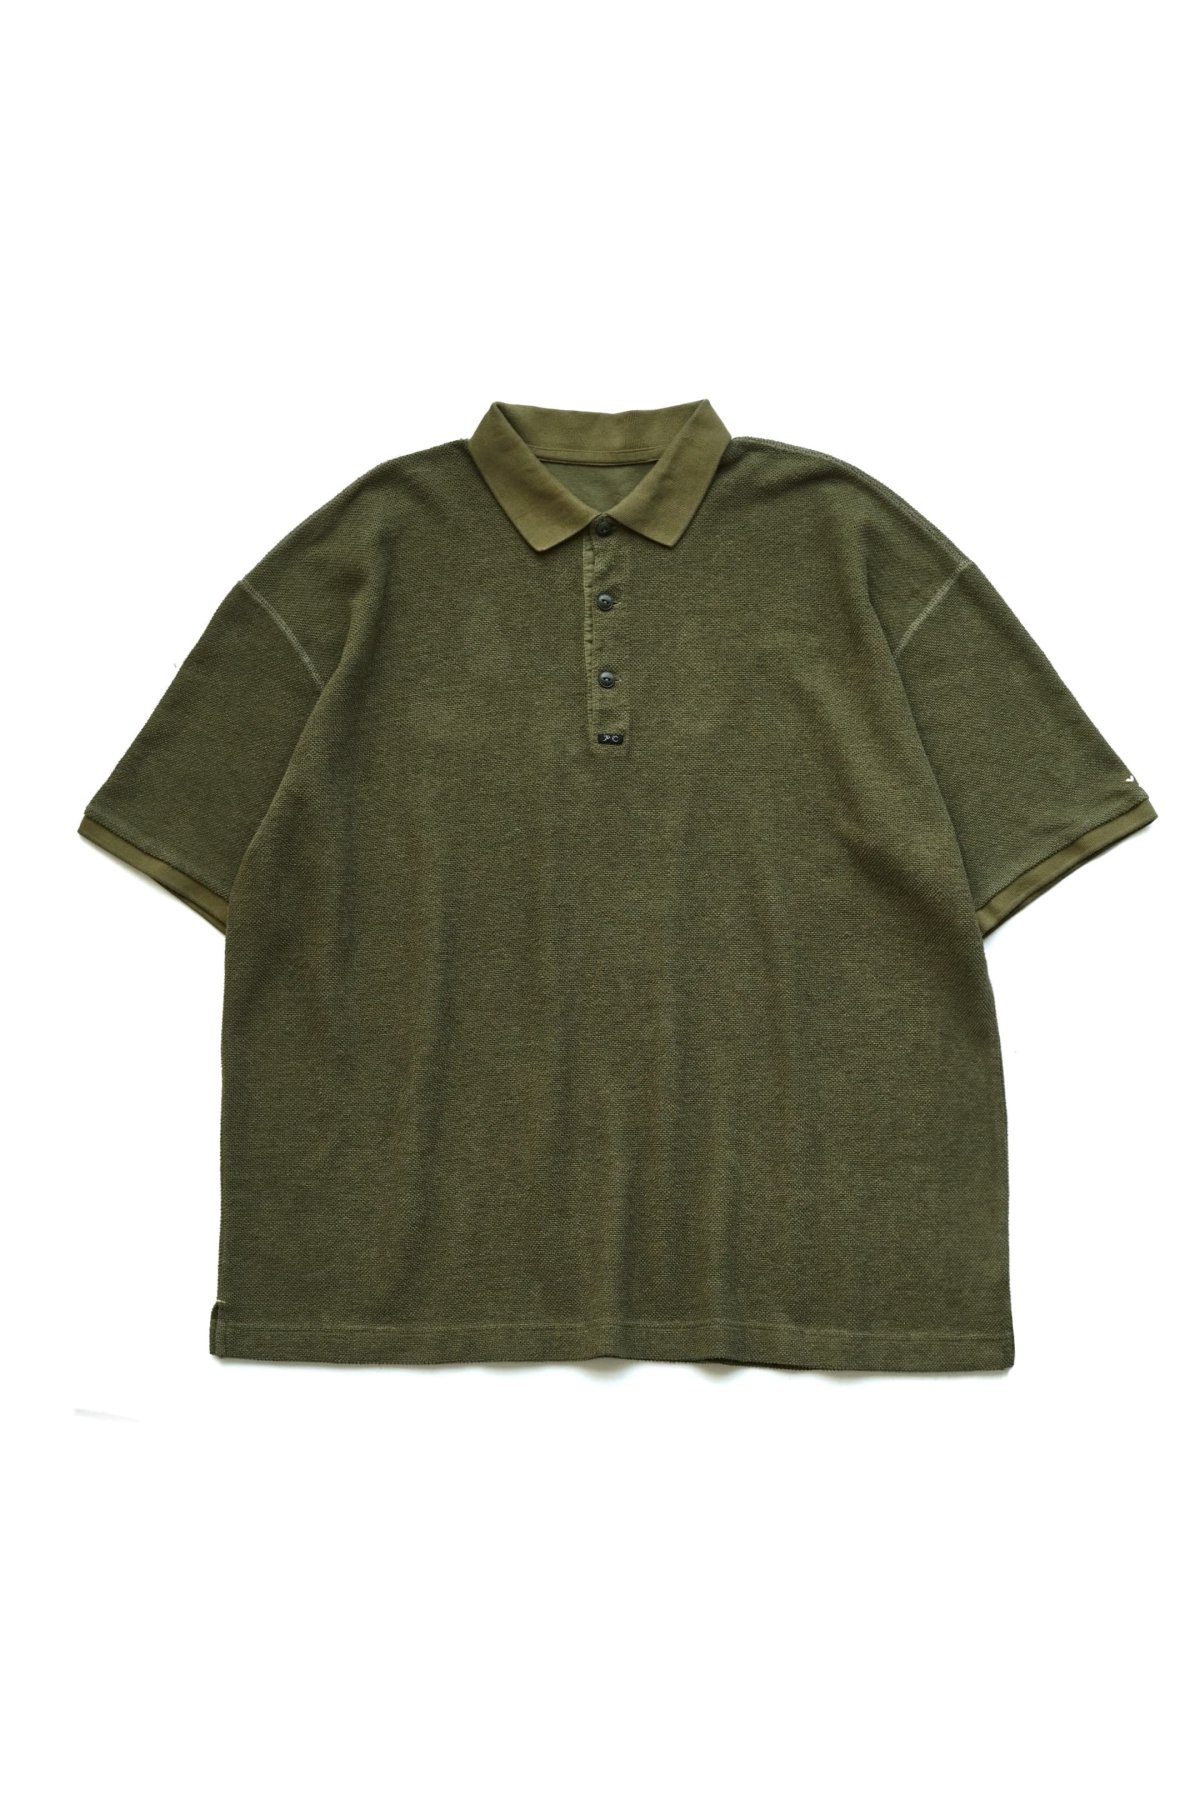 Porter Classic - SUMMER PILE POLO SHIRT - OLIVE ポータークラシック 